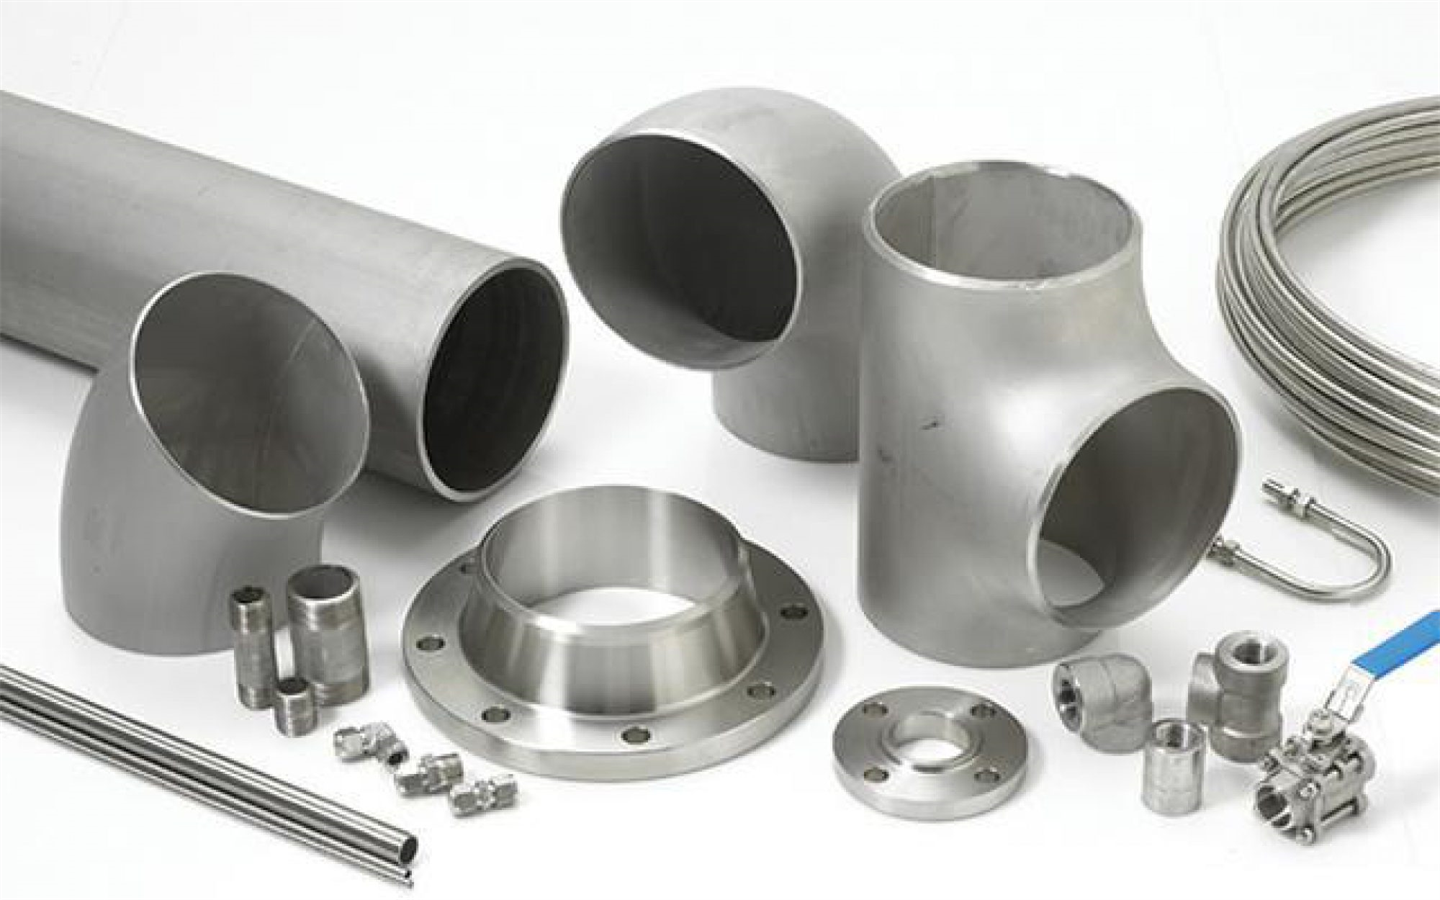 We offer Elbows, Tees, Reducers, Unions, Couplings, Crosses, Caps, Swage Nipples, Plugs and more.